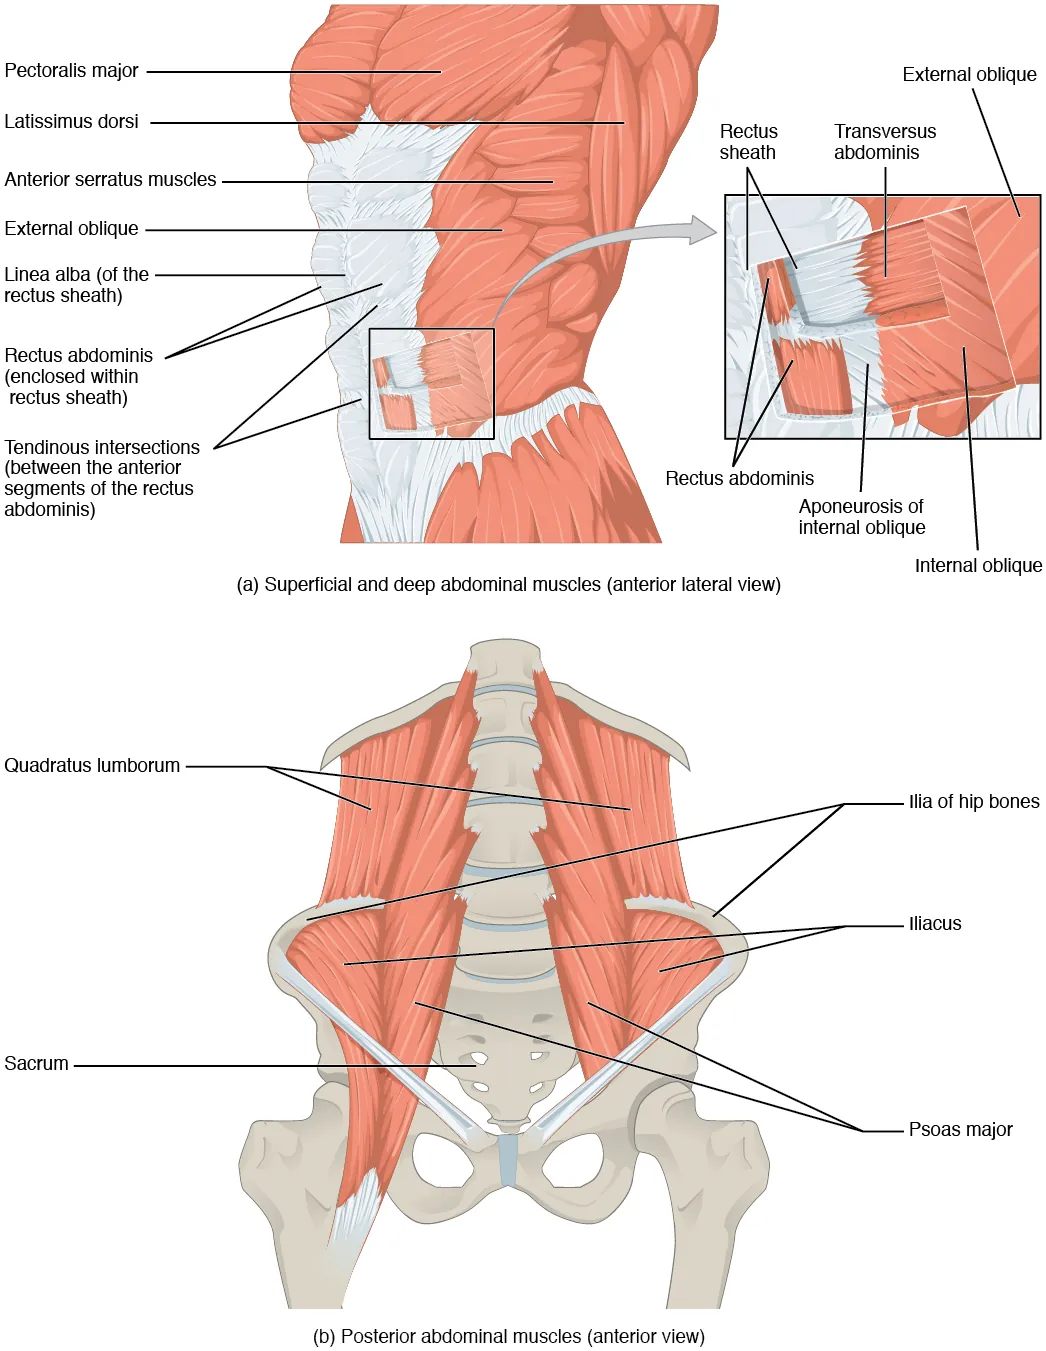 The top panel shows the lateral view of the superficial and deep abdominal muscles. The bottom panel shows the anterior view of the posterior abdominal muscles.